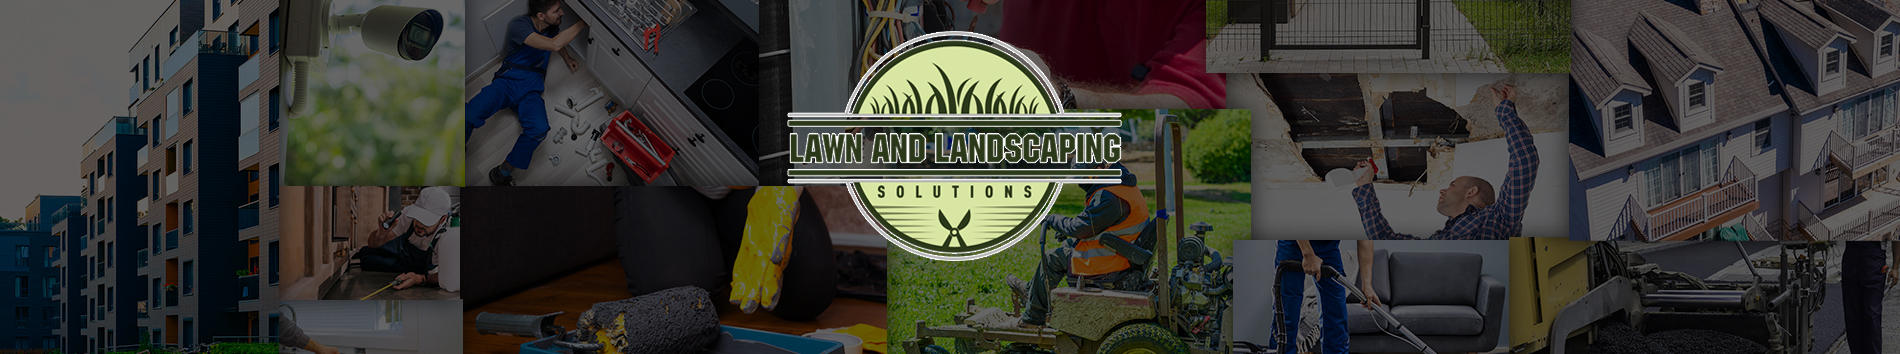 Lawn and Landscaping Solutions